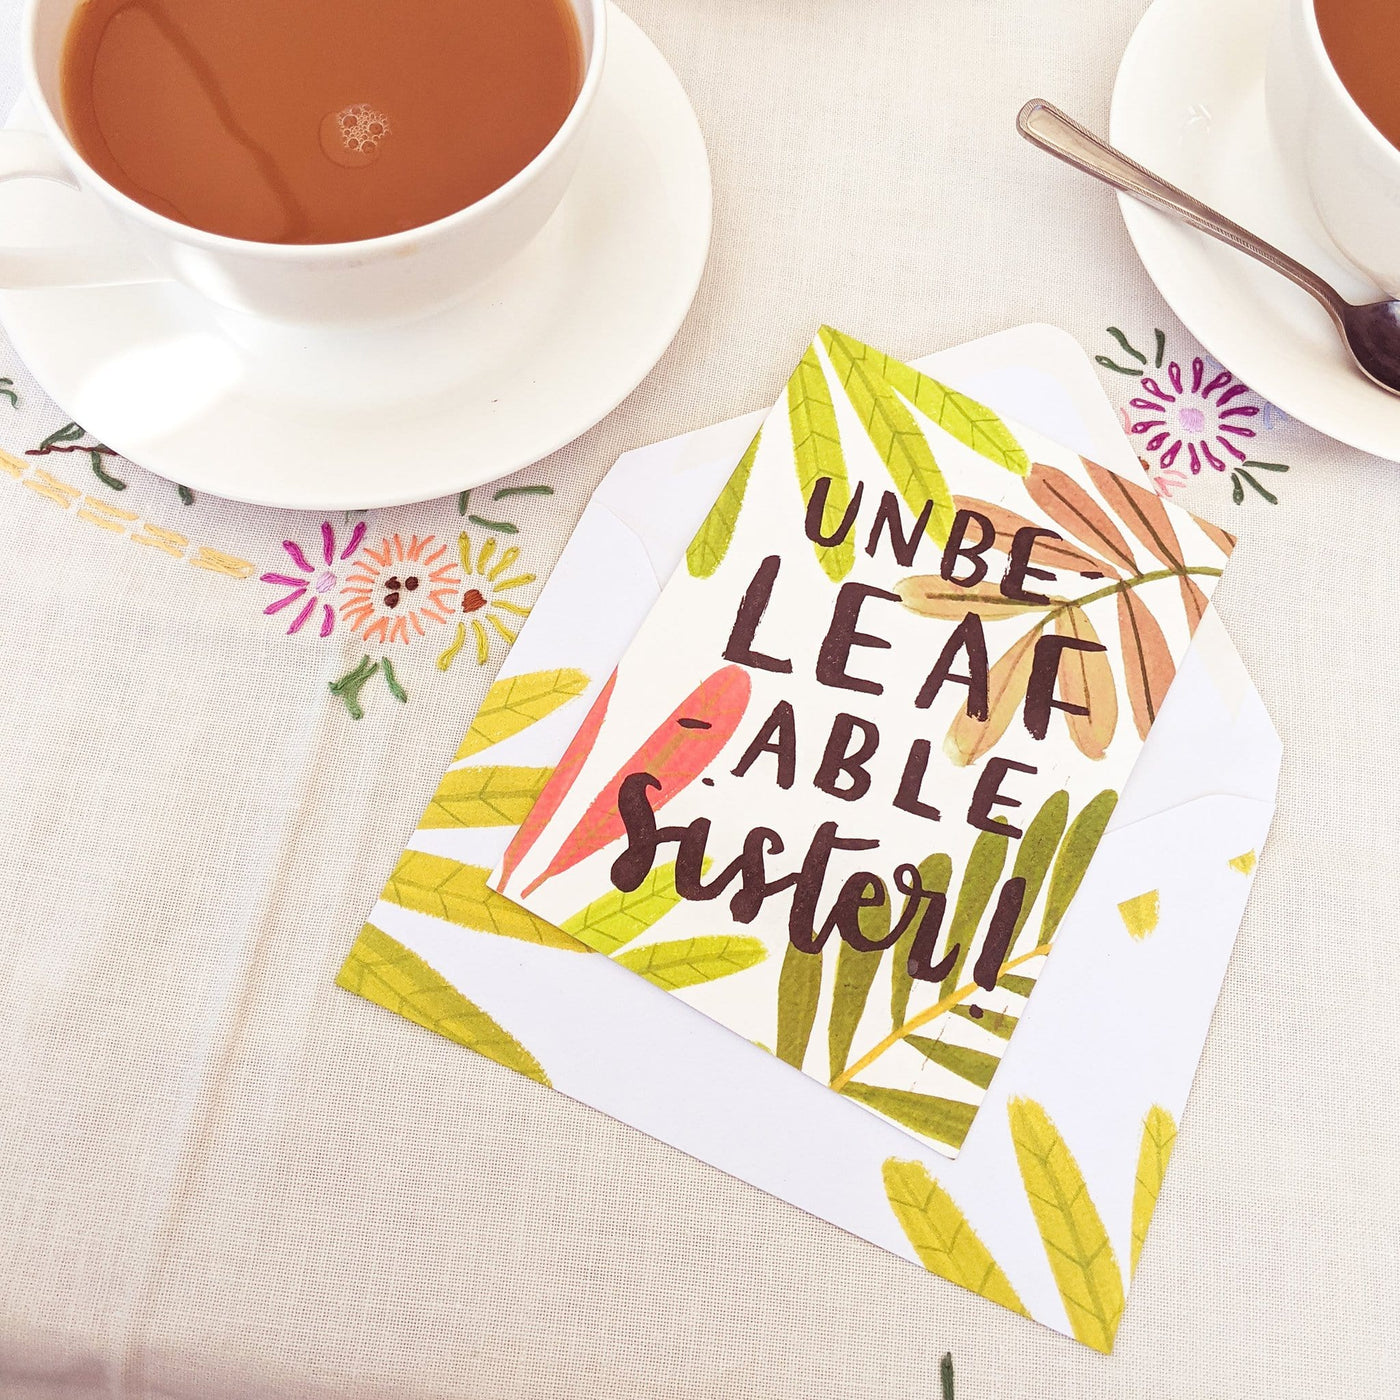 An Illustrated Leaf Greeting Card With The Words Unbeleafable Mum With A Matching Leaf Envelope Next To A Cup Of Tea - Annie Dornan Smith